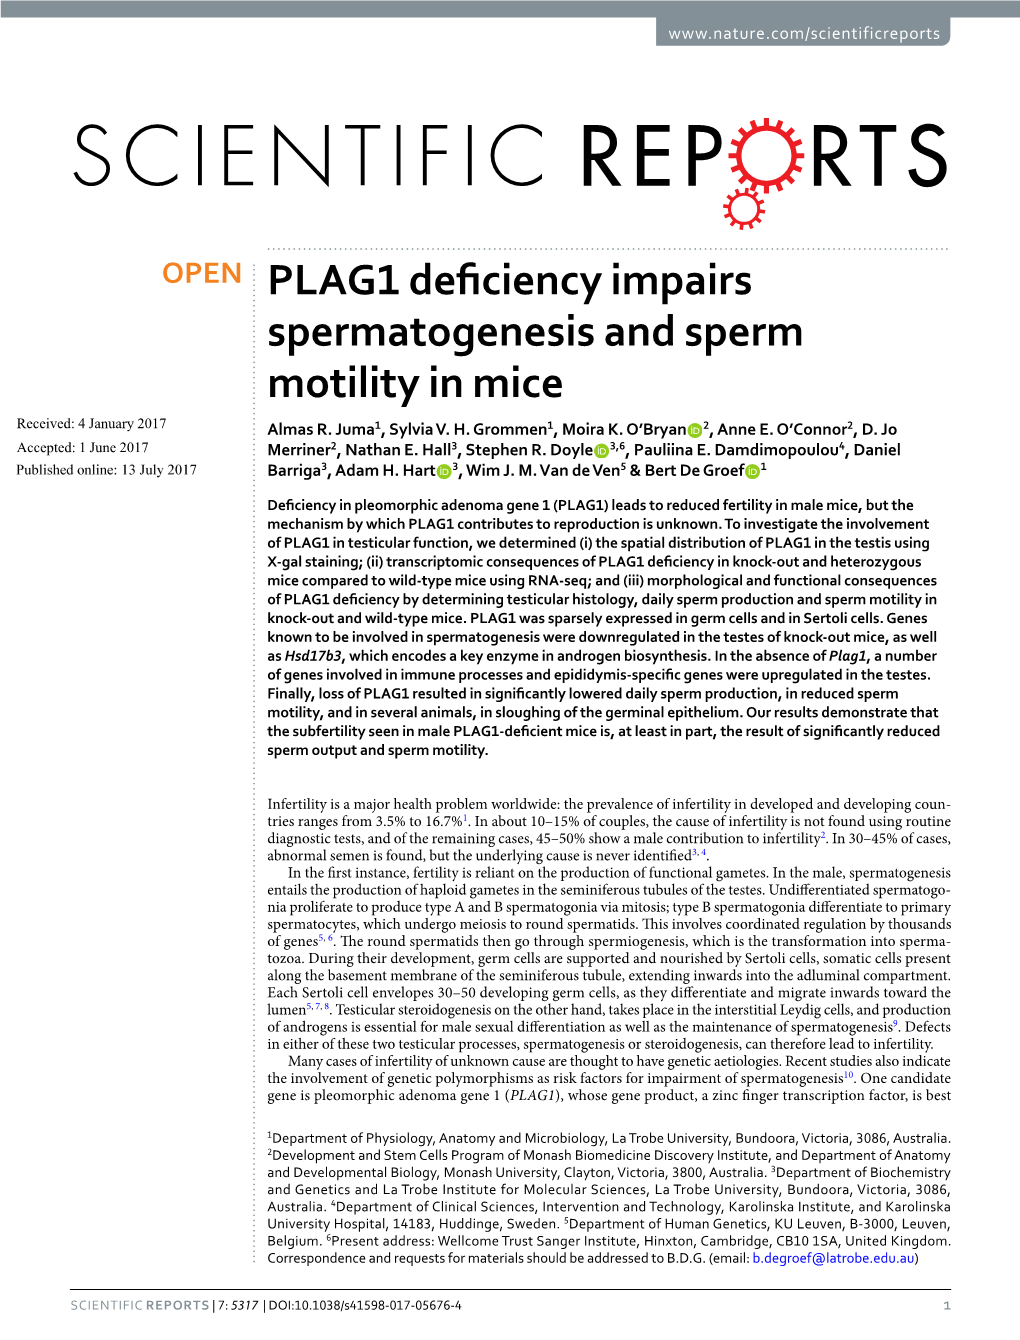 PLAG1 Deficiency Impairs Spermatogenesis and Sperm Motility in Mice Received: 4 January 2017 Almas R